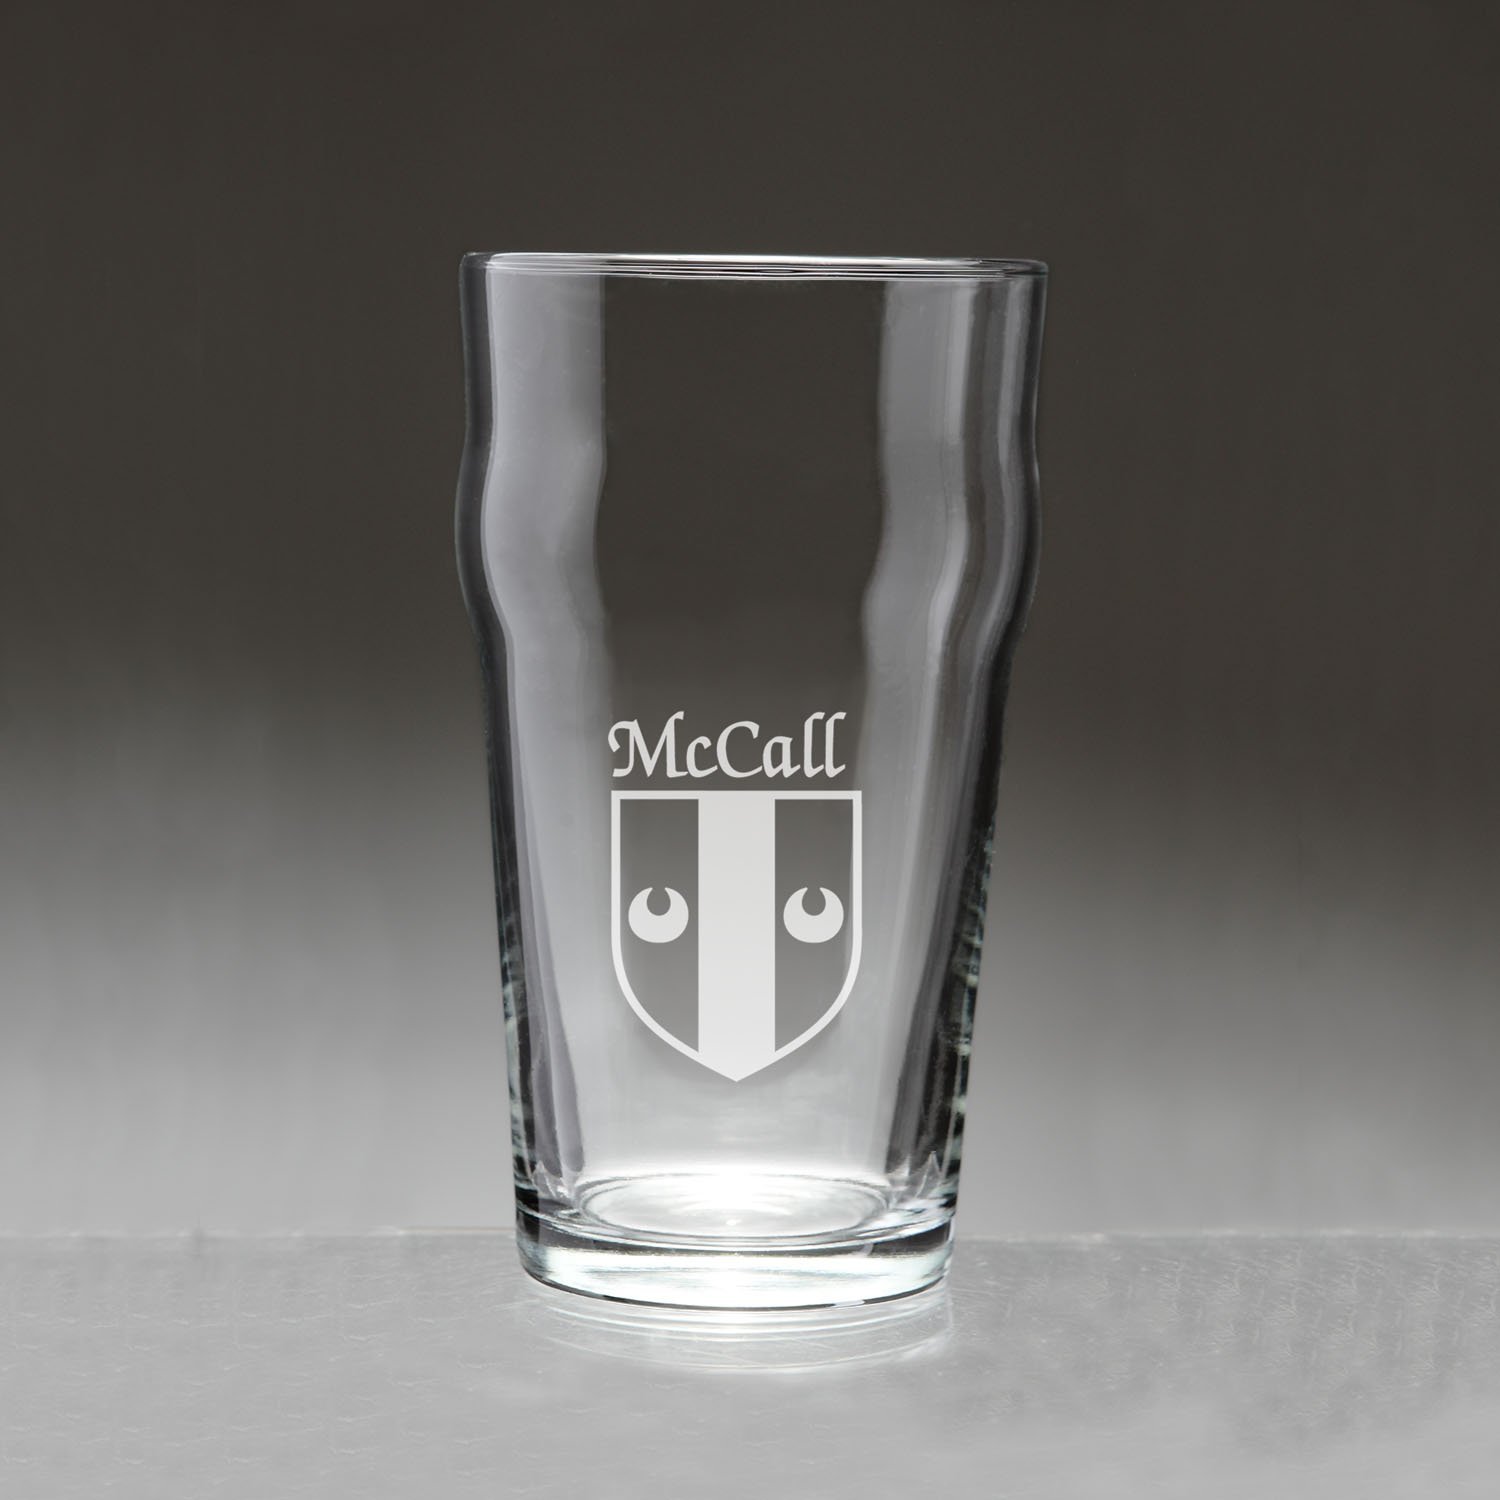 Primary image for McCall Irish Coat of Arms Pub Glasses - Set of 4 (Sand Etched)